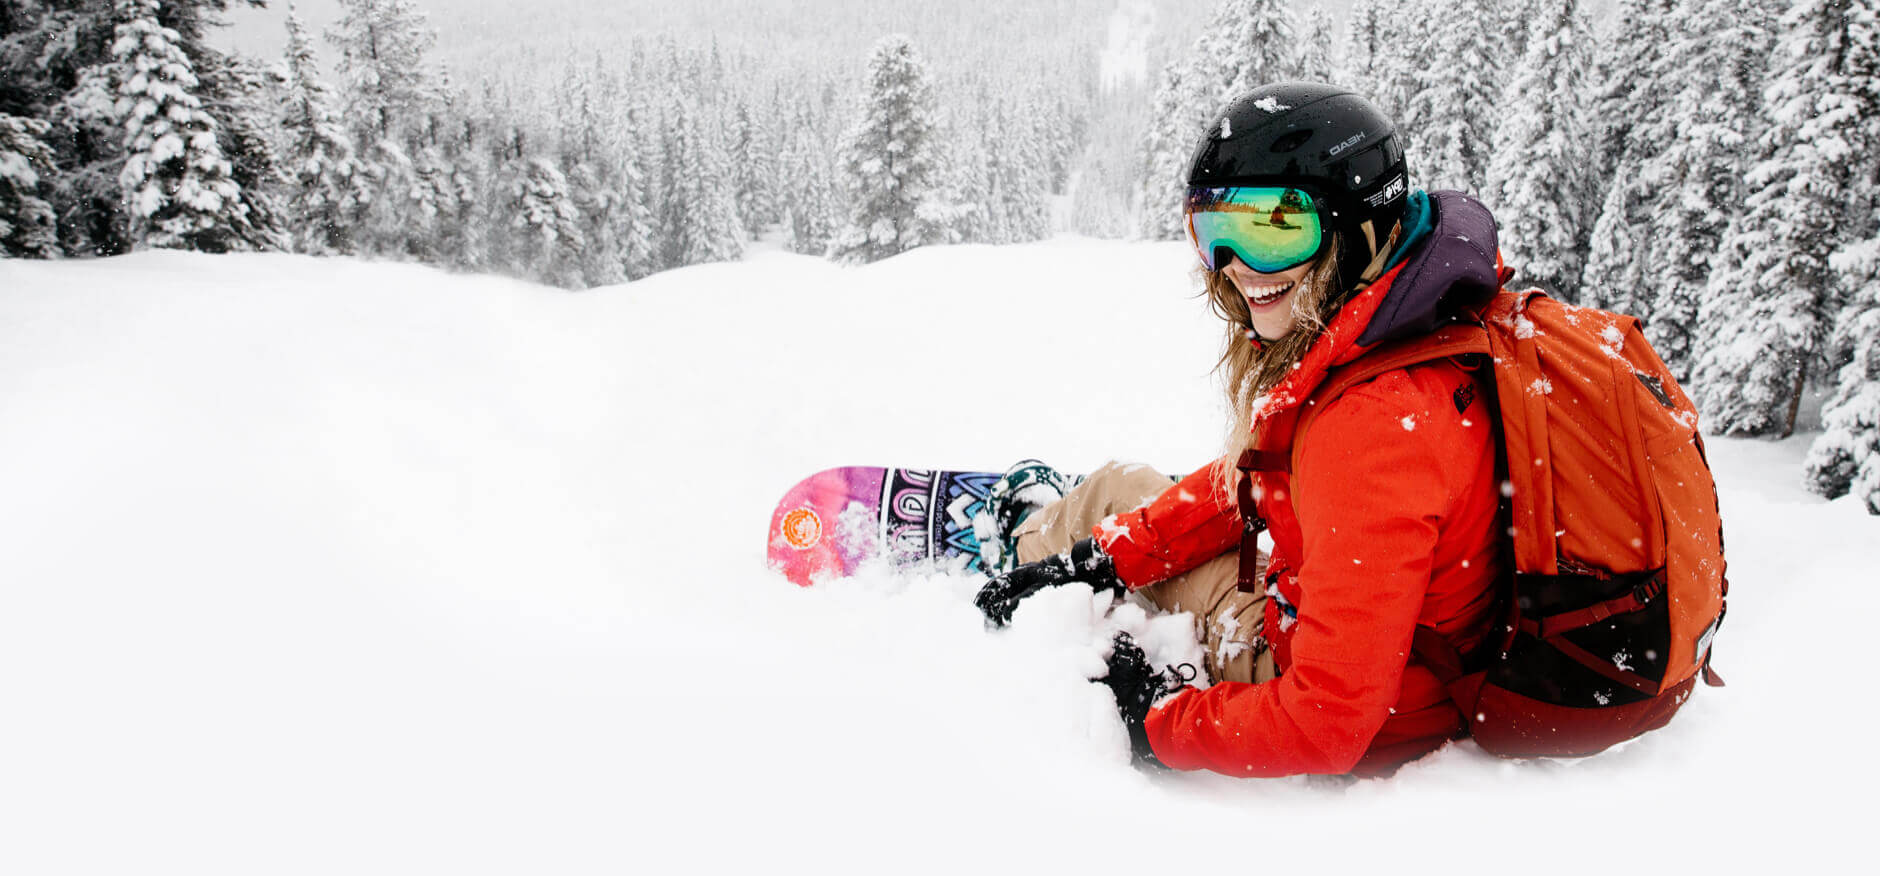 Imagery of a woman snowboarder on the Marmot Basin mountain, sitting in deep powder snow with a big smile on her face